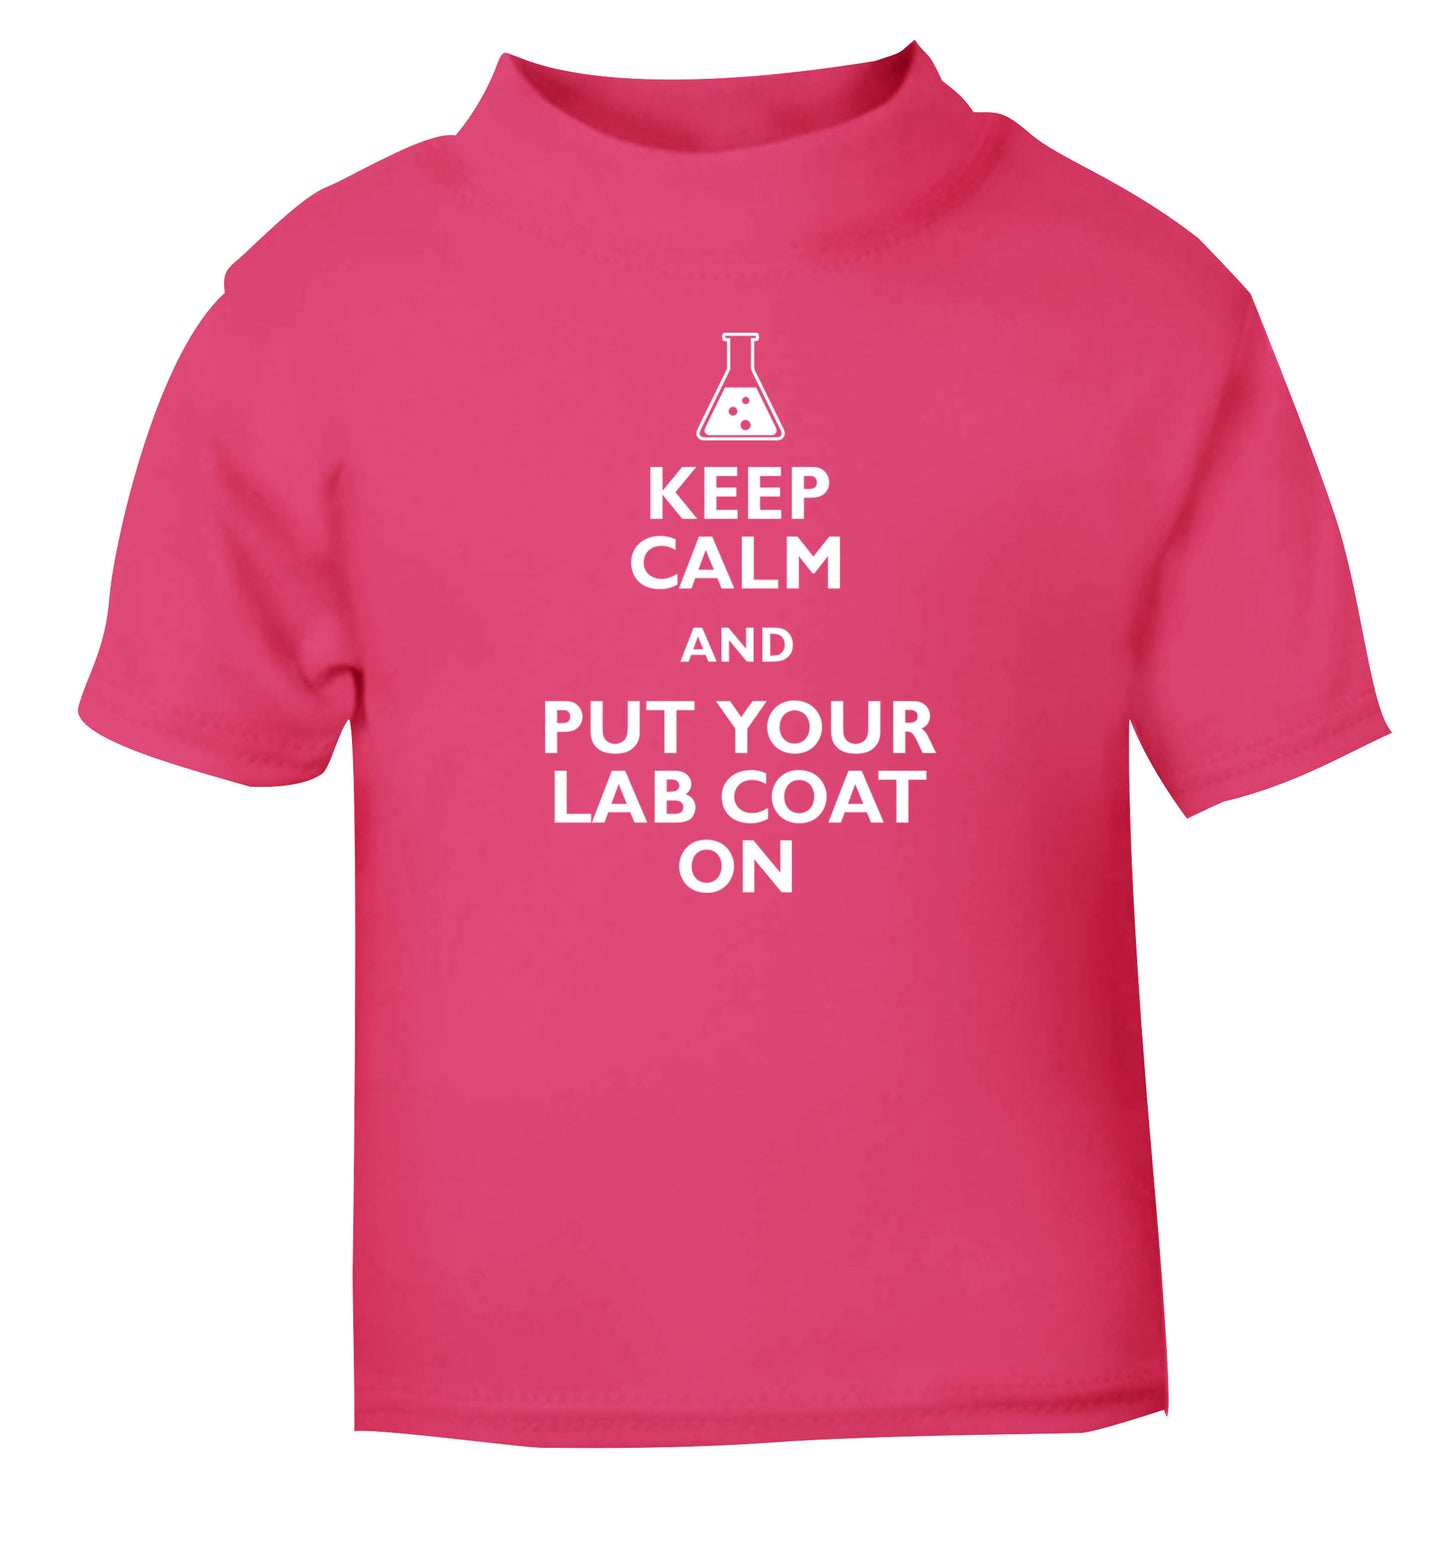 Keep calm and put your lab coat on pink Baby Toddler Tshirt 2 Years